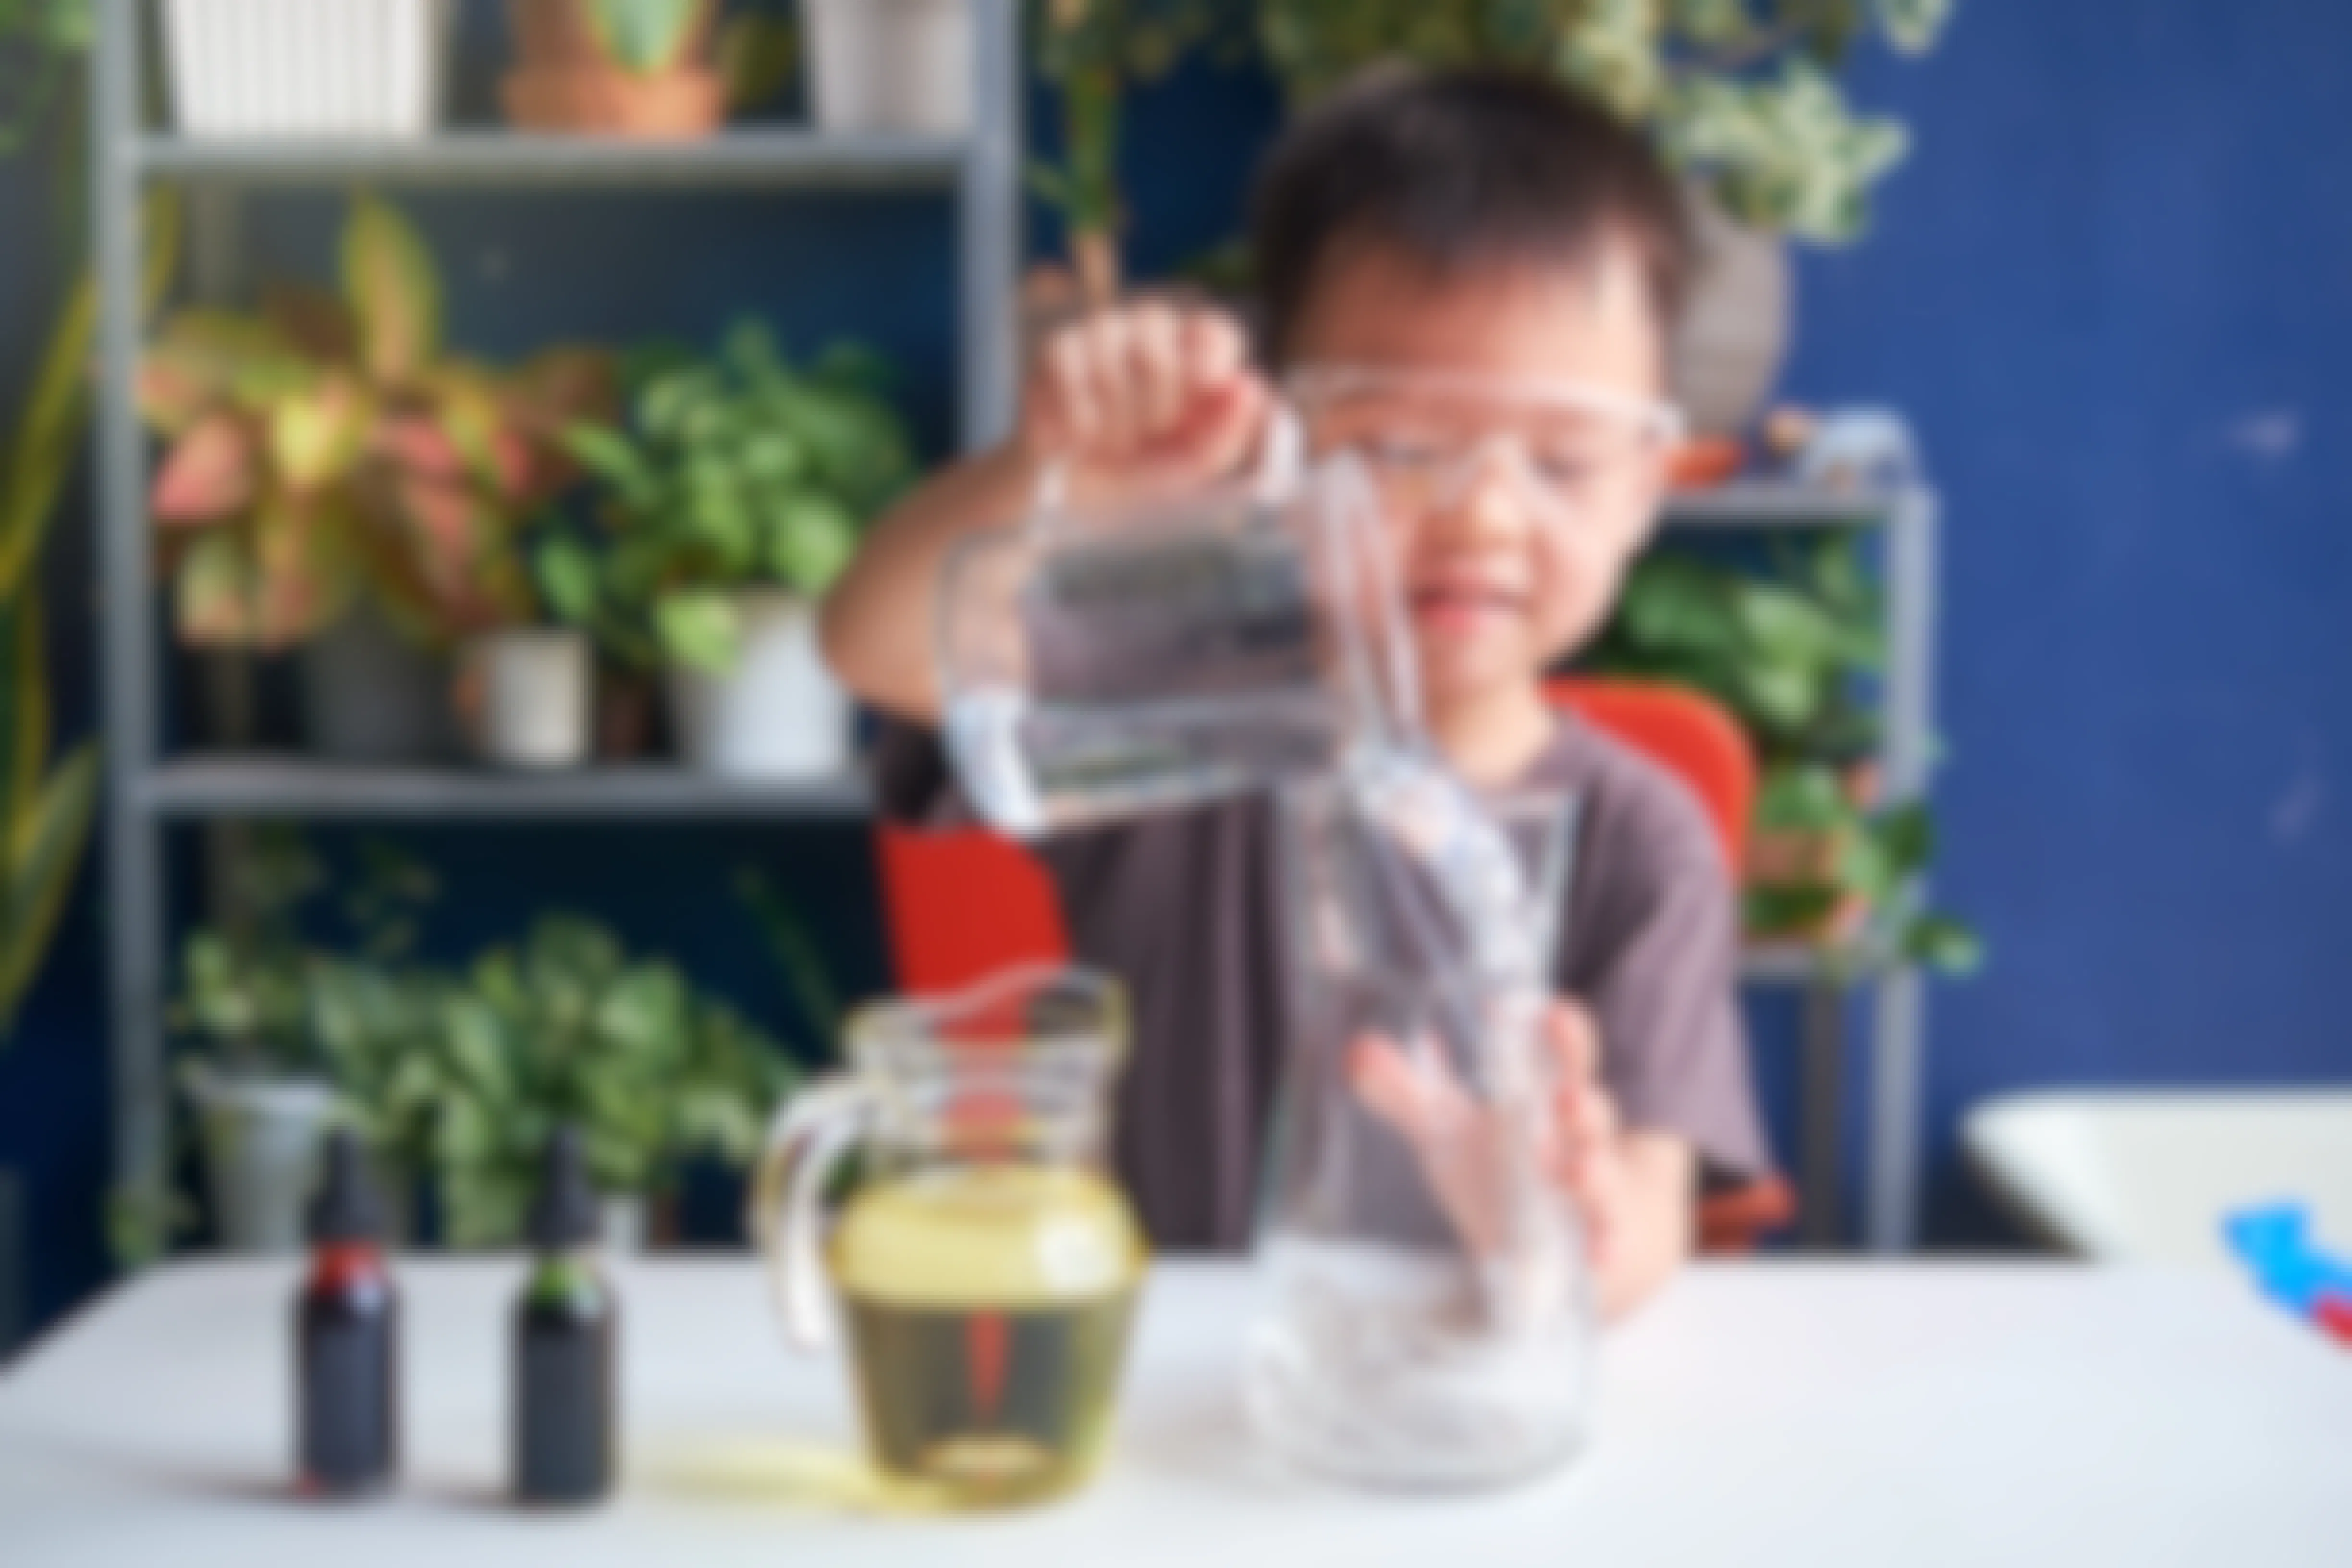 Child with goggles on purs a liquid into a beaker